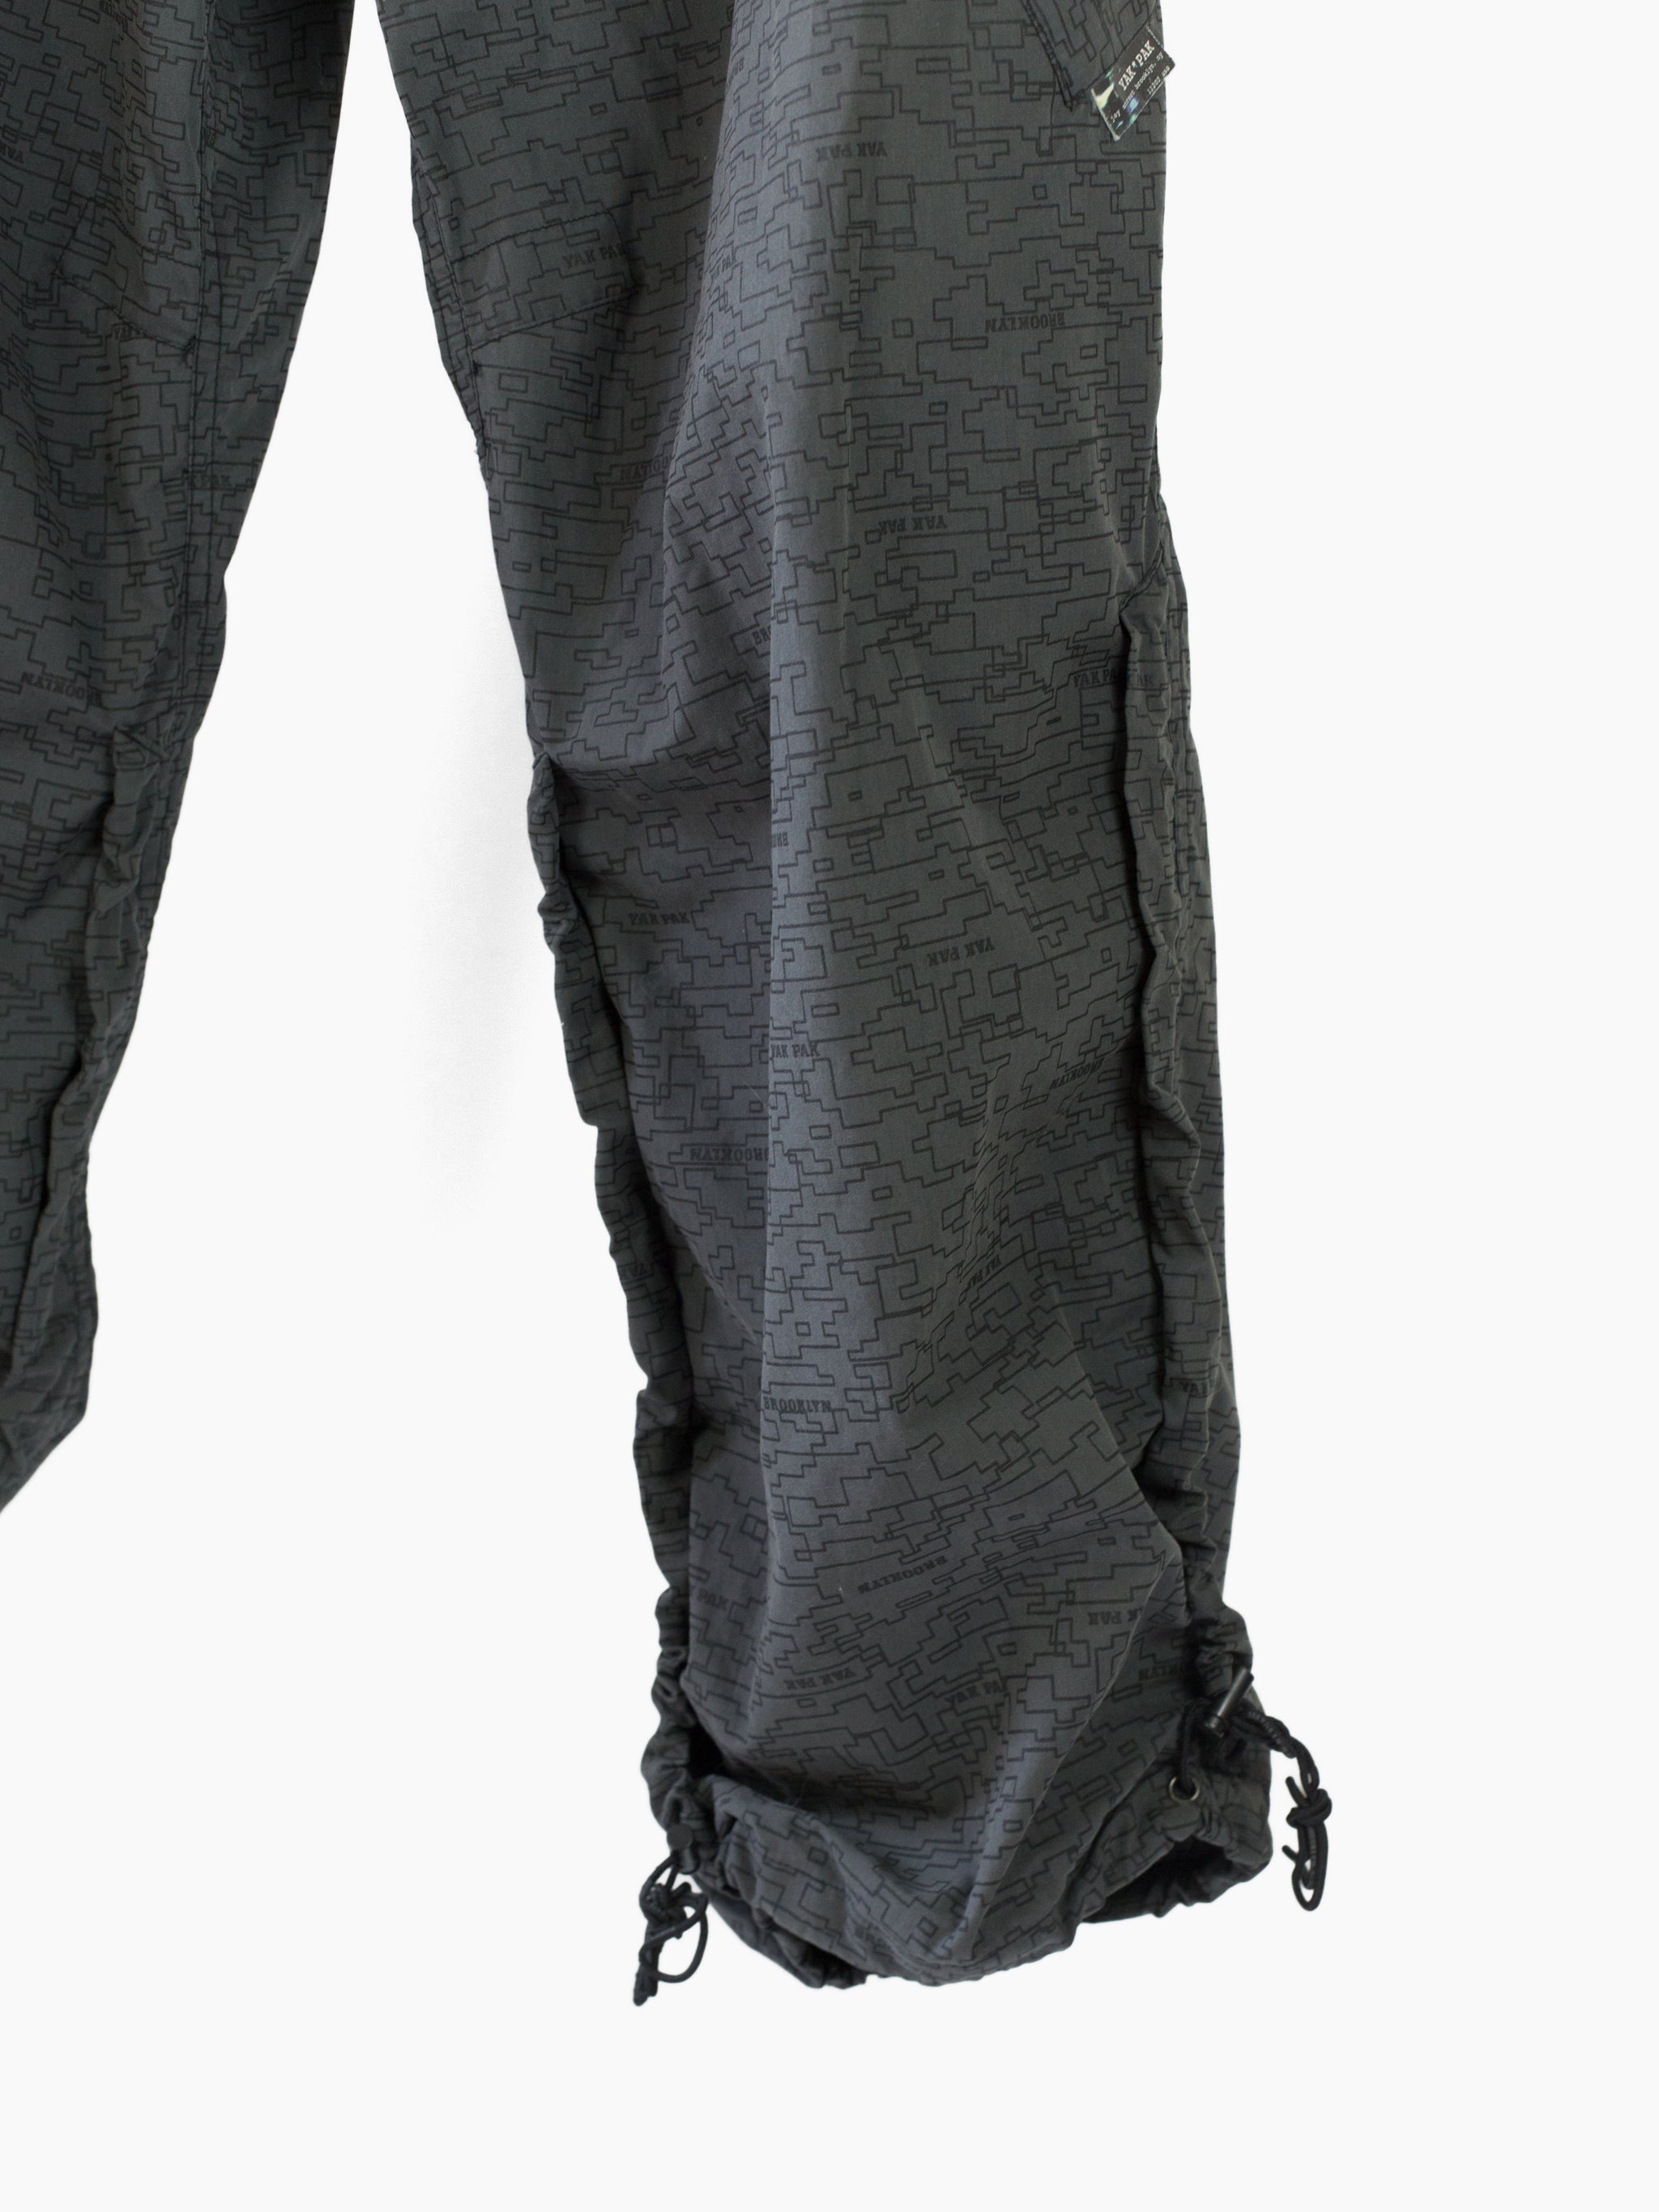 Black Yak Hariana M Pant '21 - Go Vertical - All about mountains